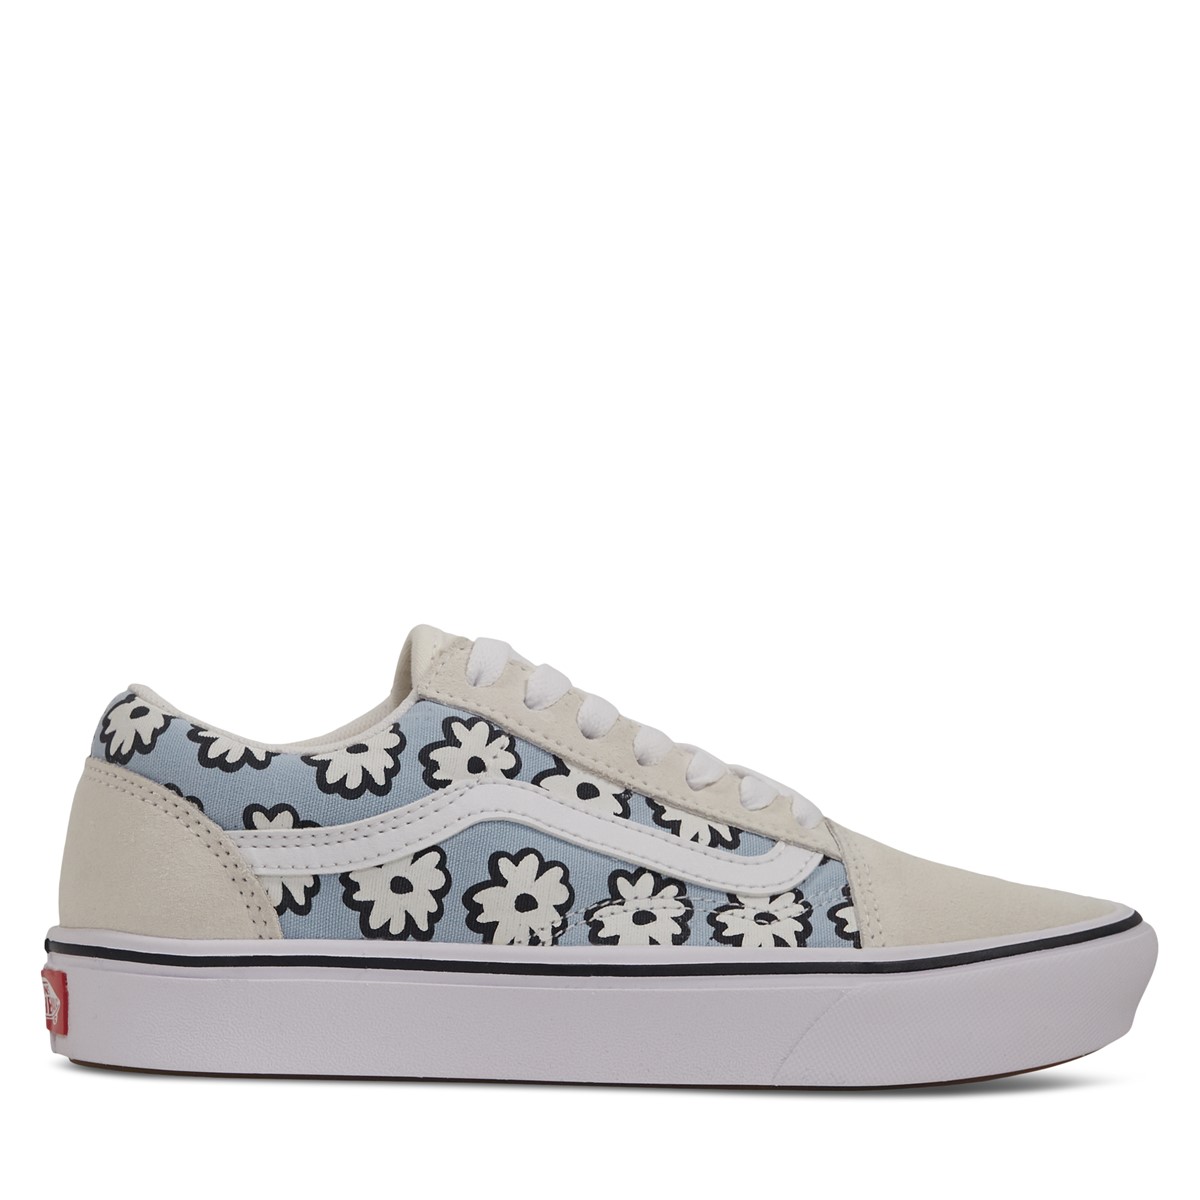 ComfyCush Old Skool Mixed Cozy Floral Sneakers in Off-White/Pastel